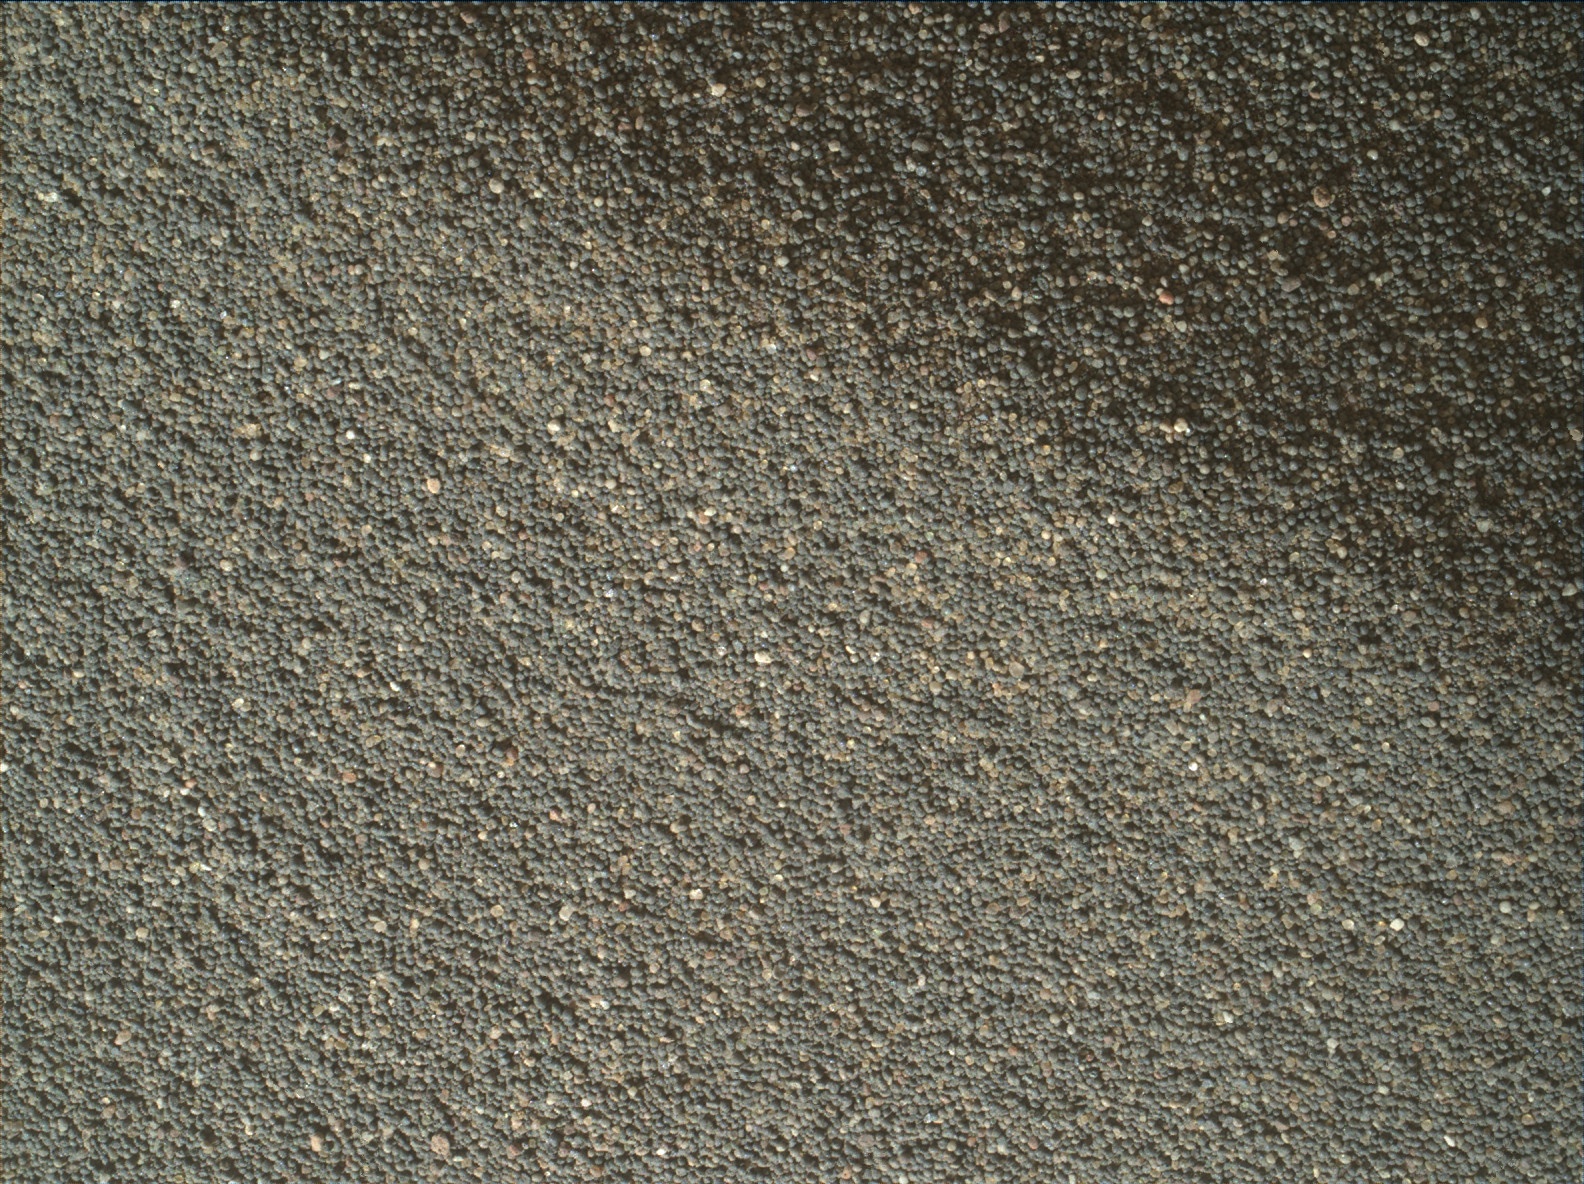 Nasa's Mars rover Curiosity acquired this image using its Mars Hand Lens Imager (MAHLI) on Sol 3079